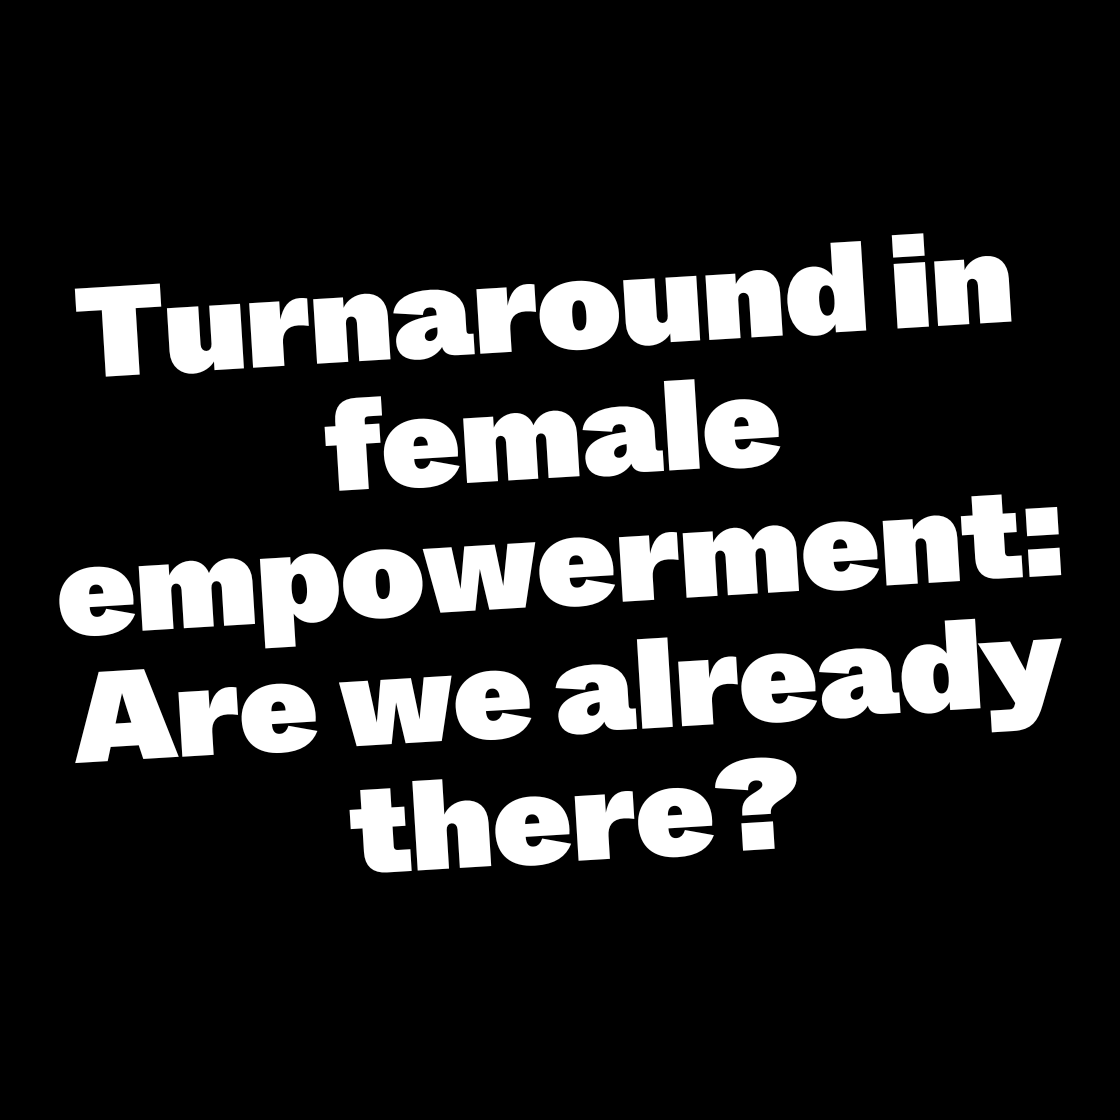 Turnaround in female empowerment: Are we already there?